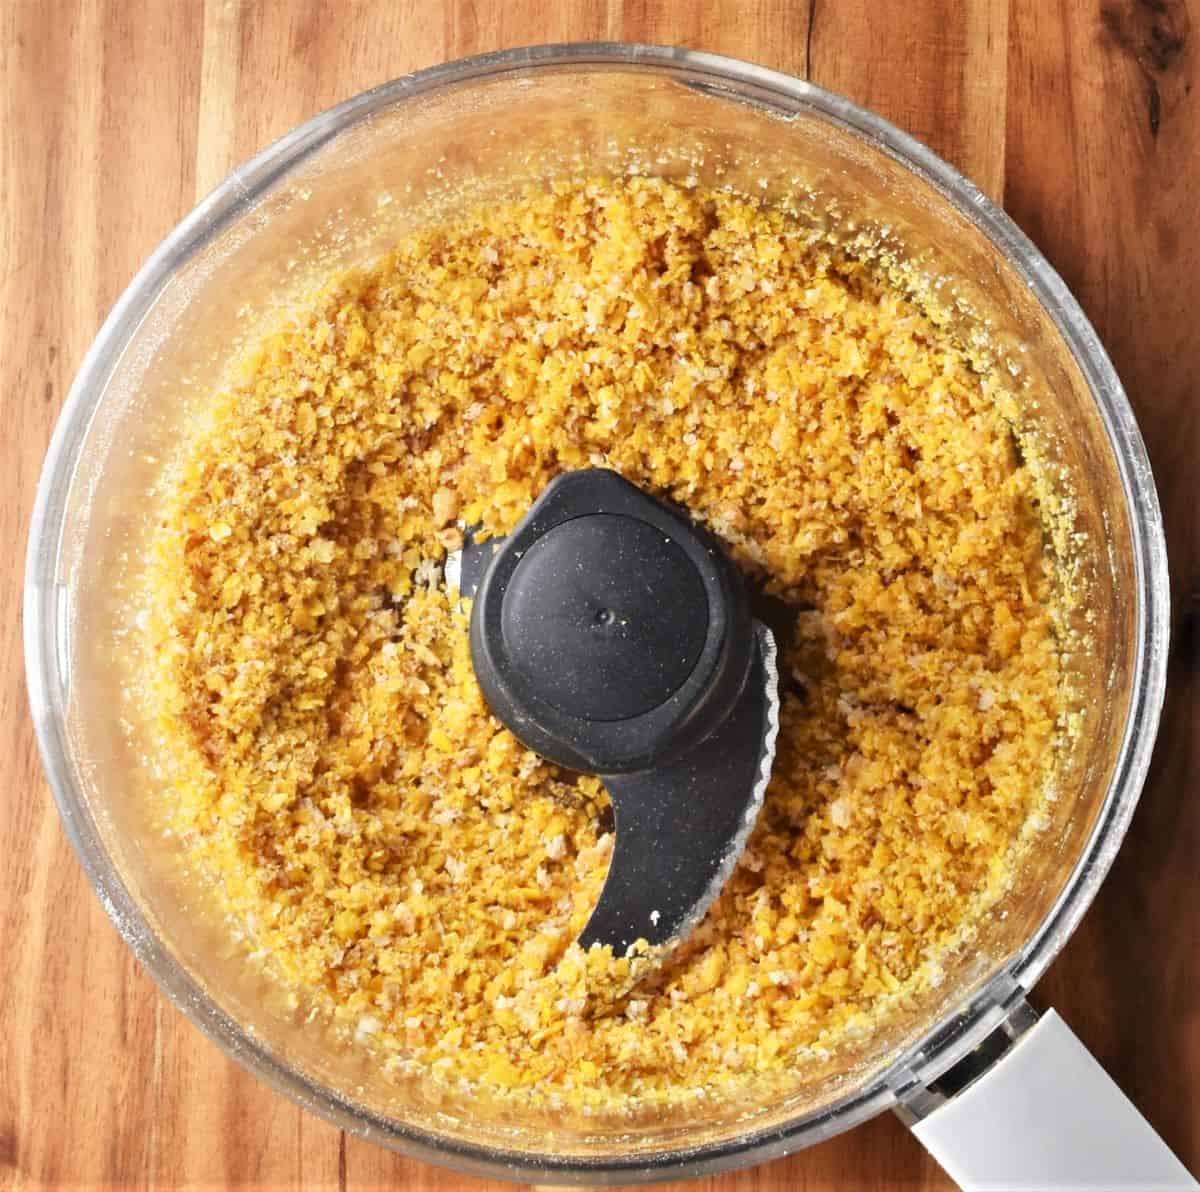 Crumbly cornflake mixture in food processor.